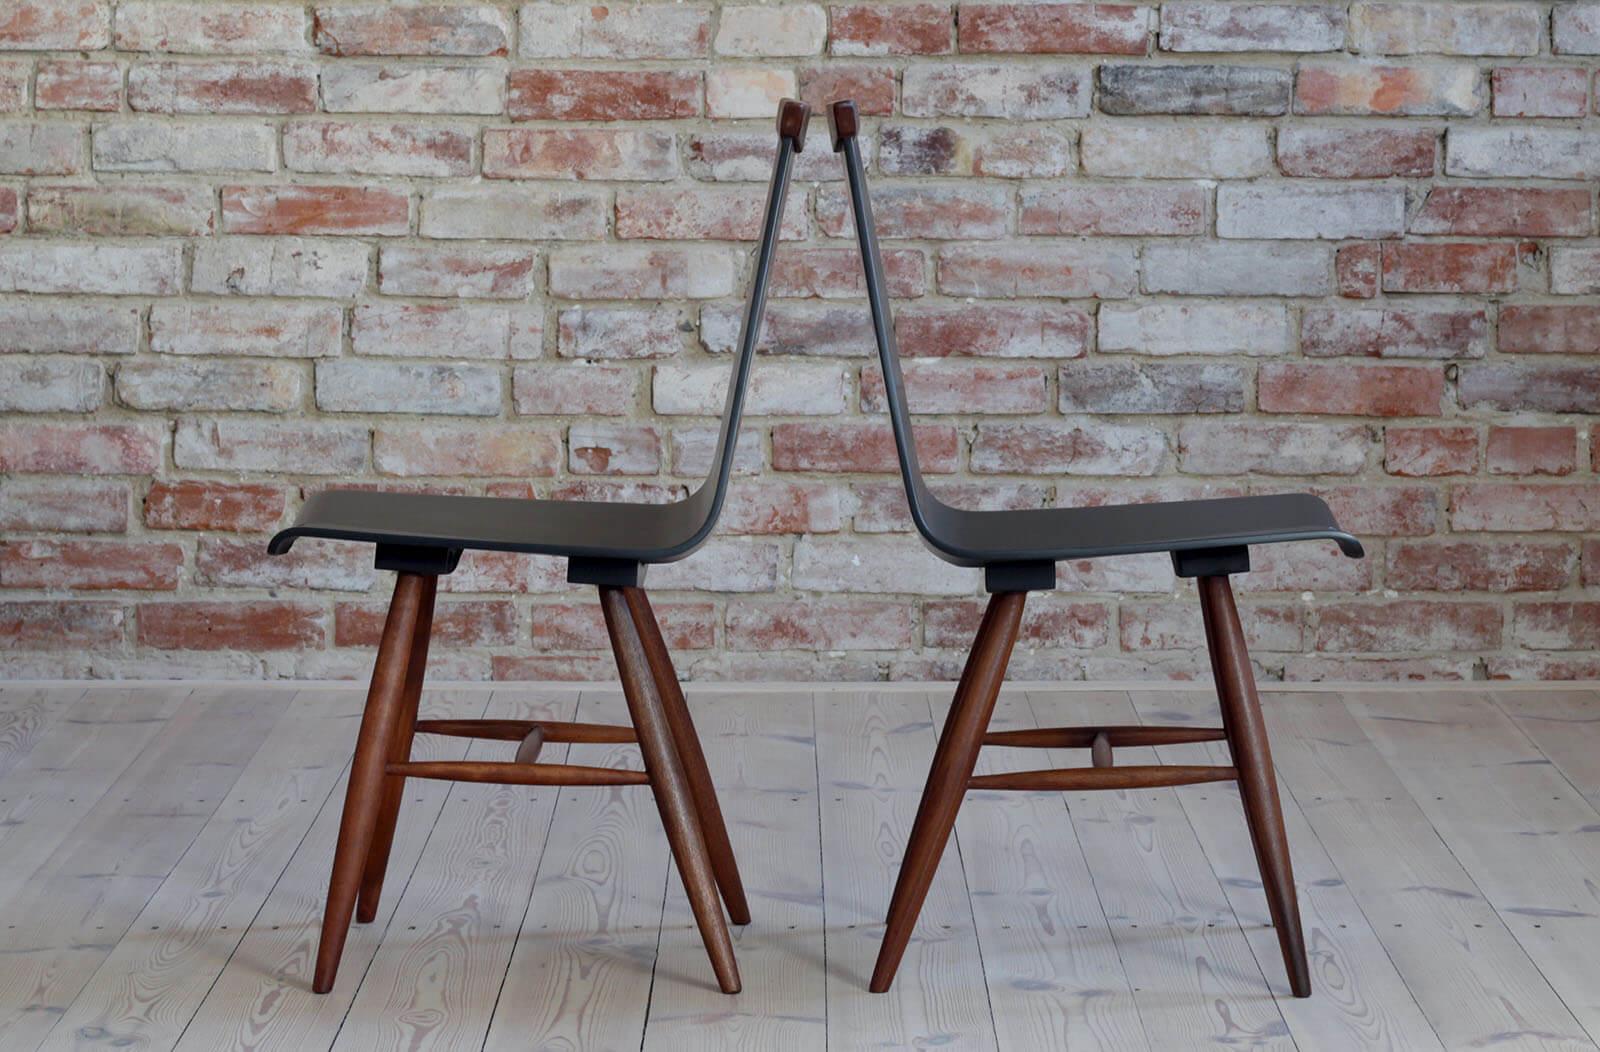 Finnish Set of 4 Dining Chairs by Risto Halme for Isku, Finland, 1960s